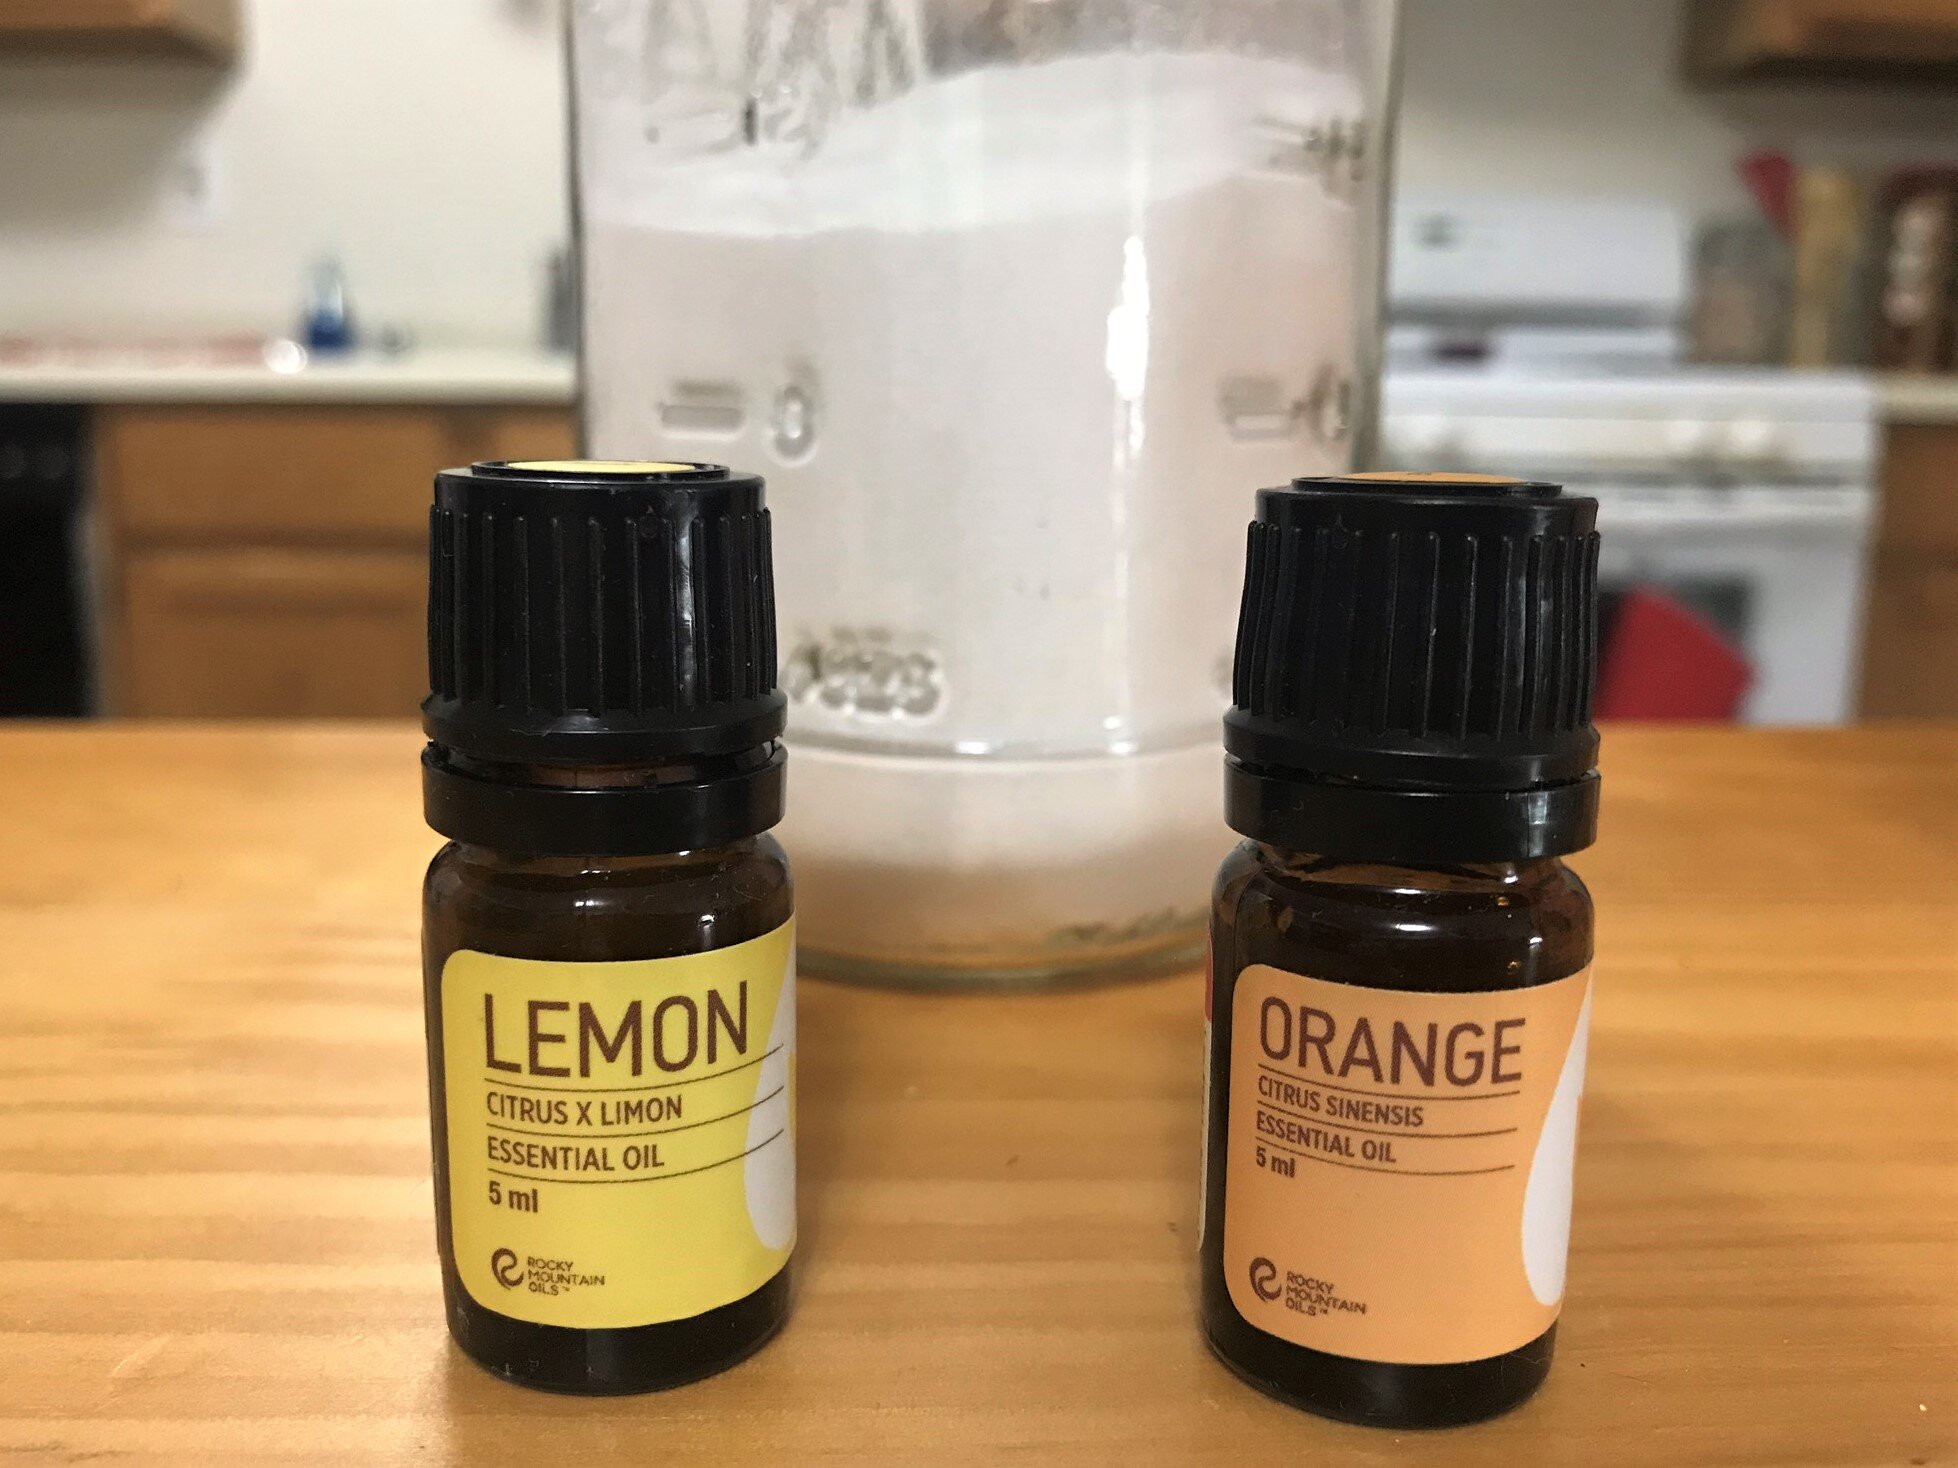 You can combine any of your favorite essential oils in this recipe, but I recommend mixing  lemon  with  orange  essential oil from Rocky Mountain Oils (RMO).